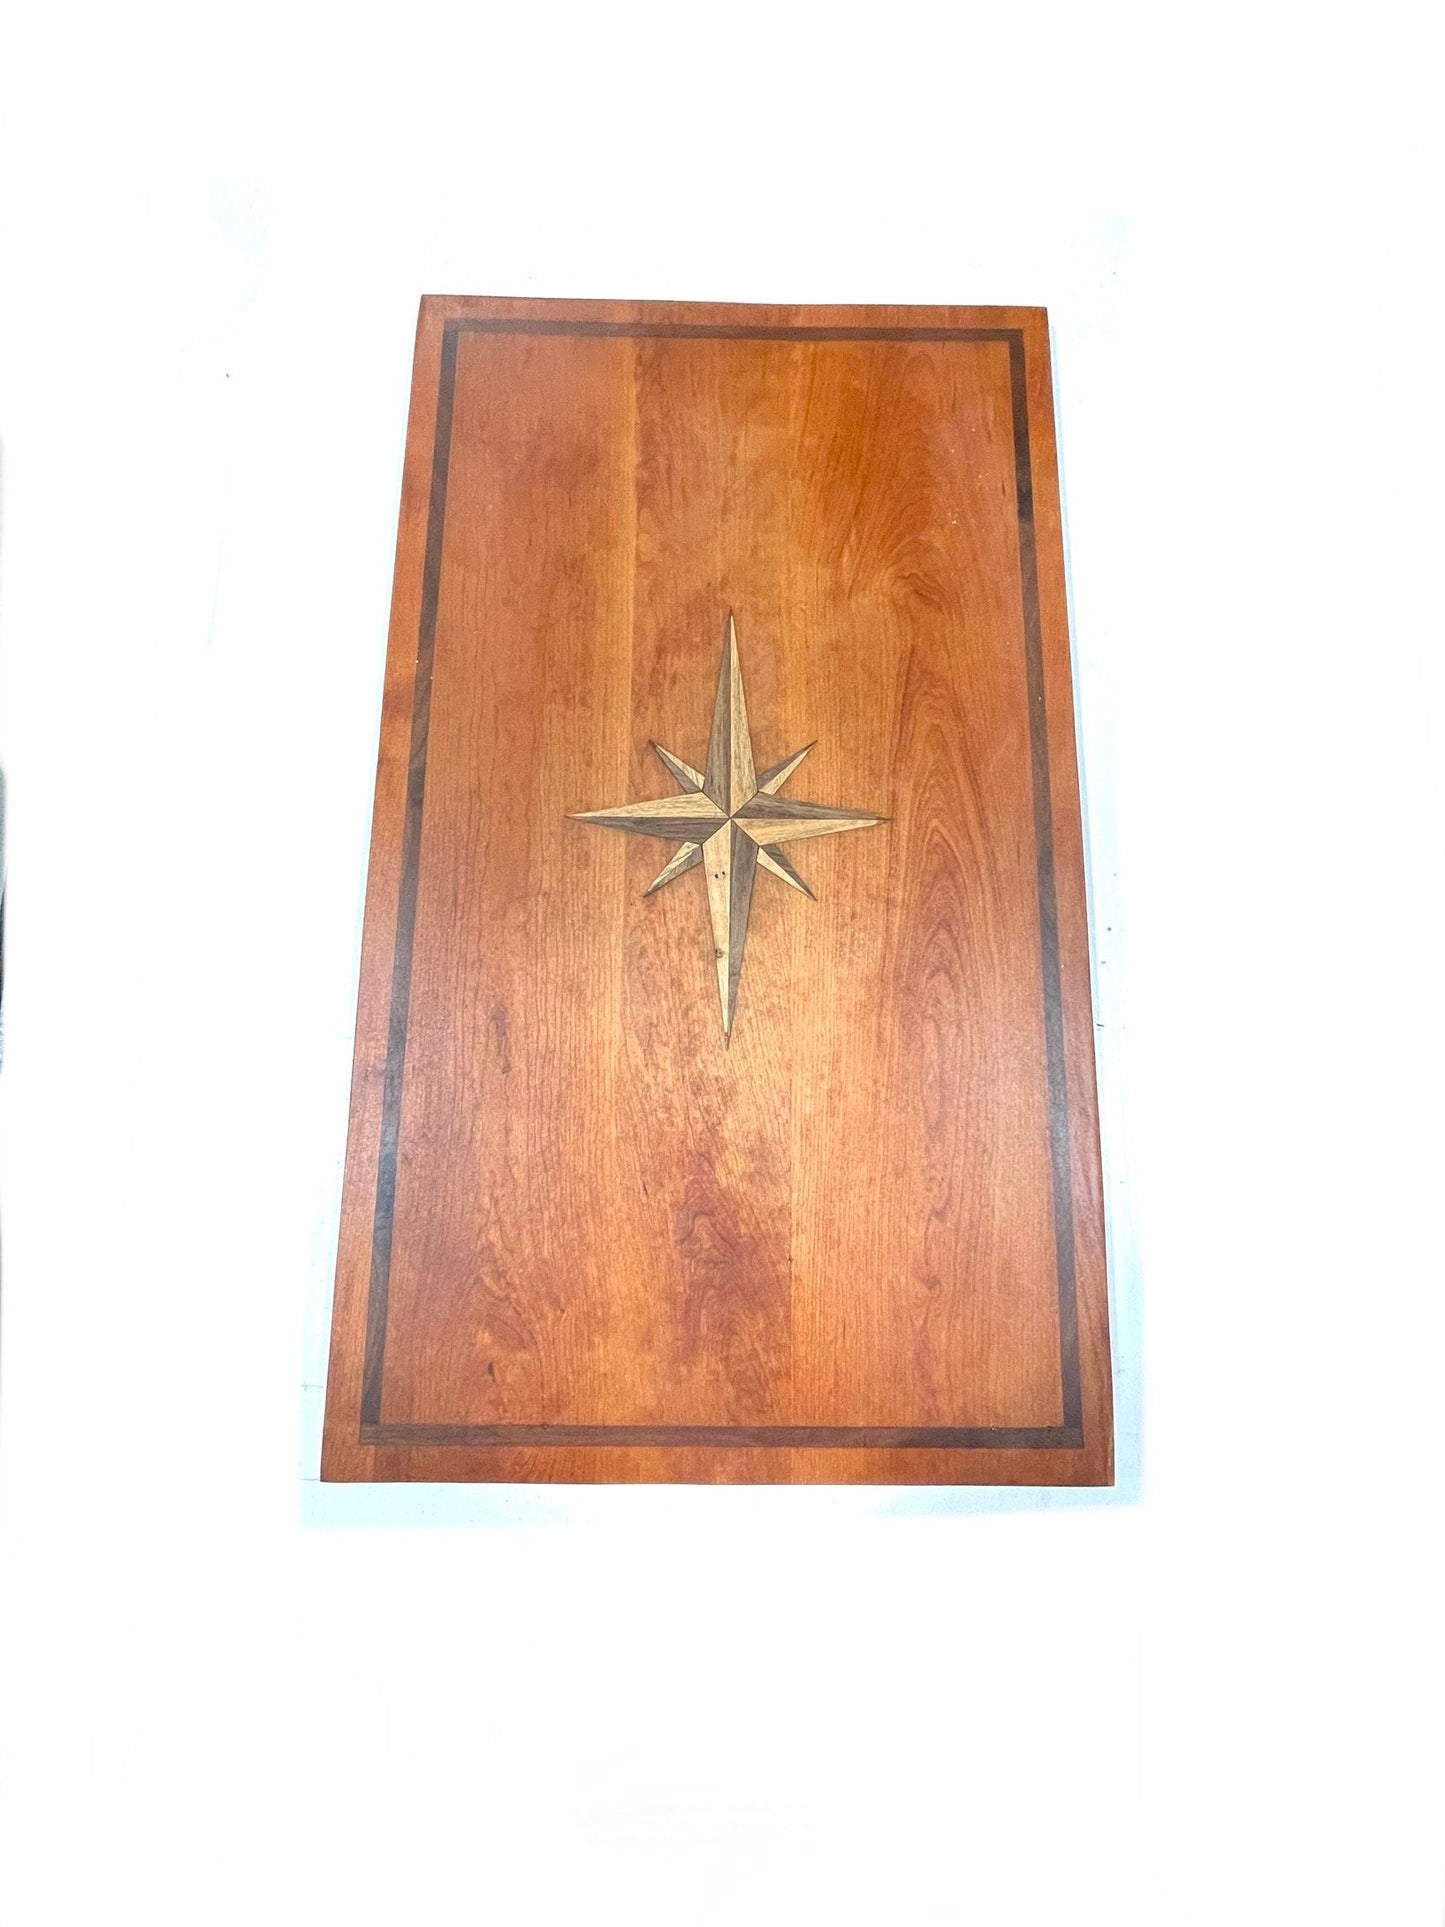 Cherry Boat Table with Walnut and Ash Compass Rose Inlay and Walnut Border